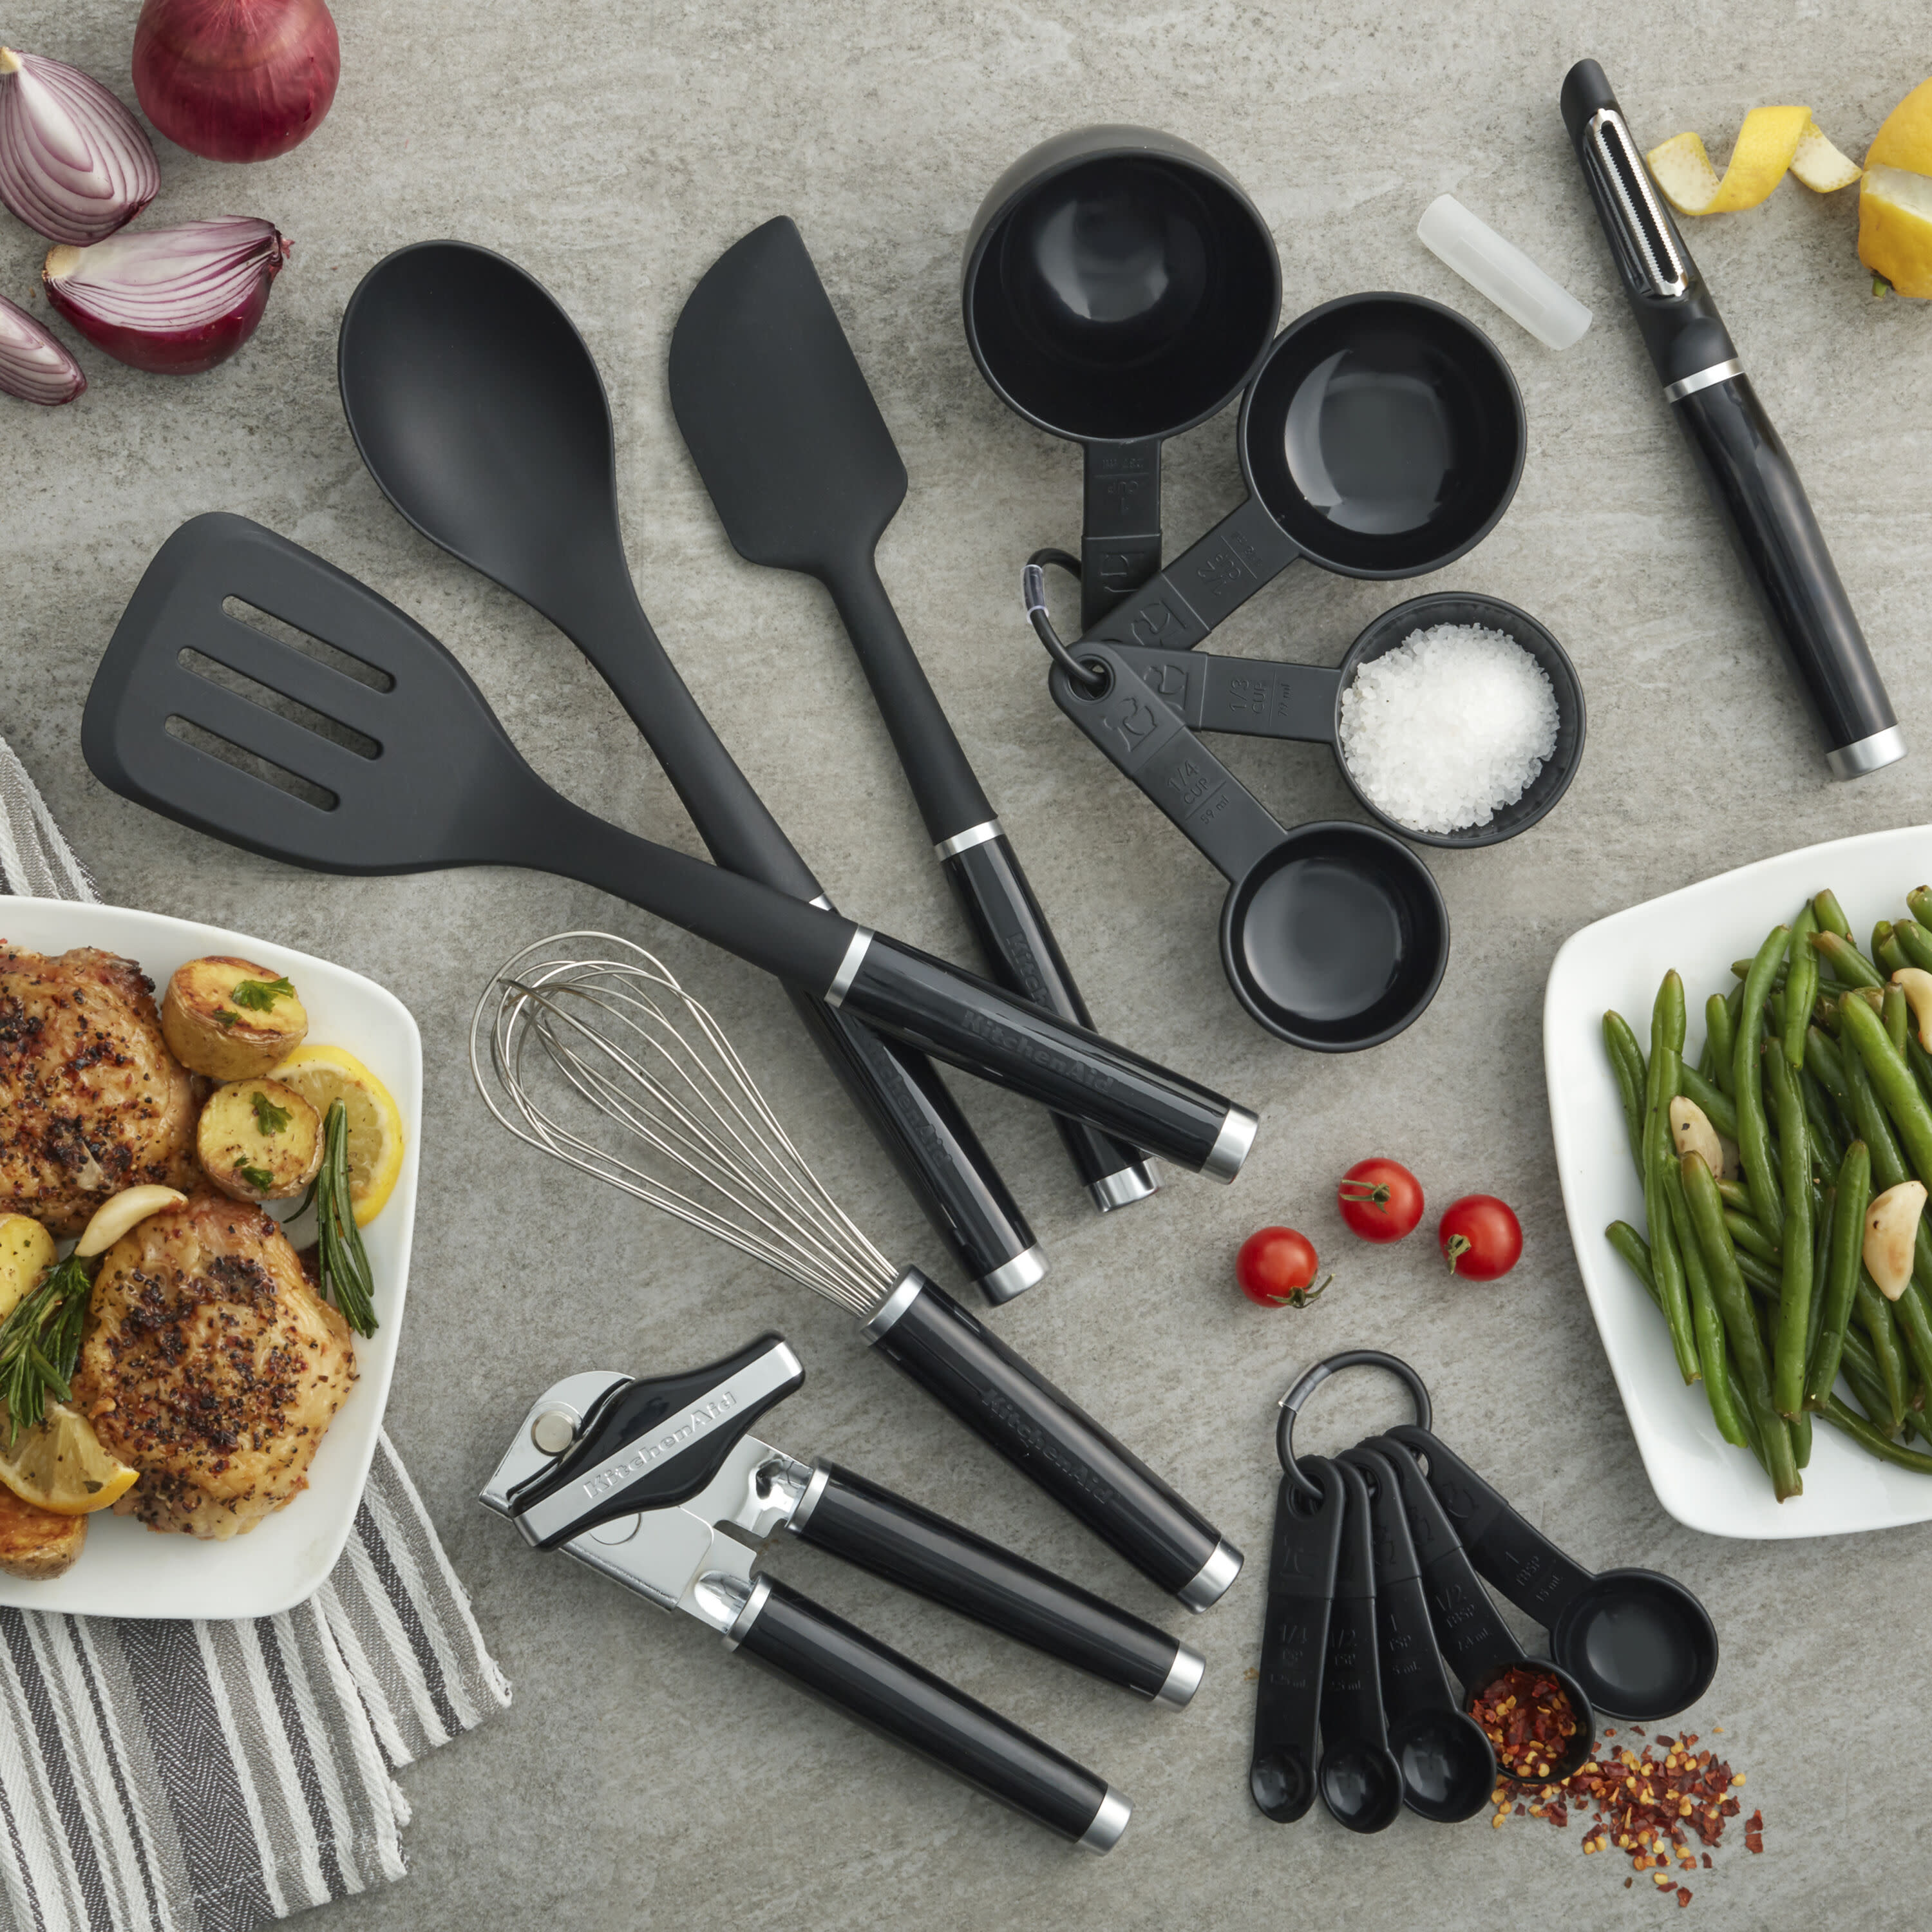 Kitchenaid 15-Piece Tool and Gadget Set in Black - image 2 of 18